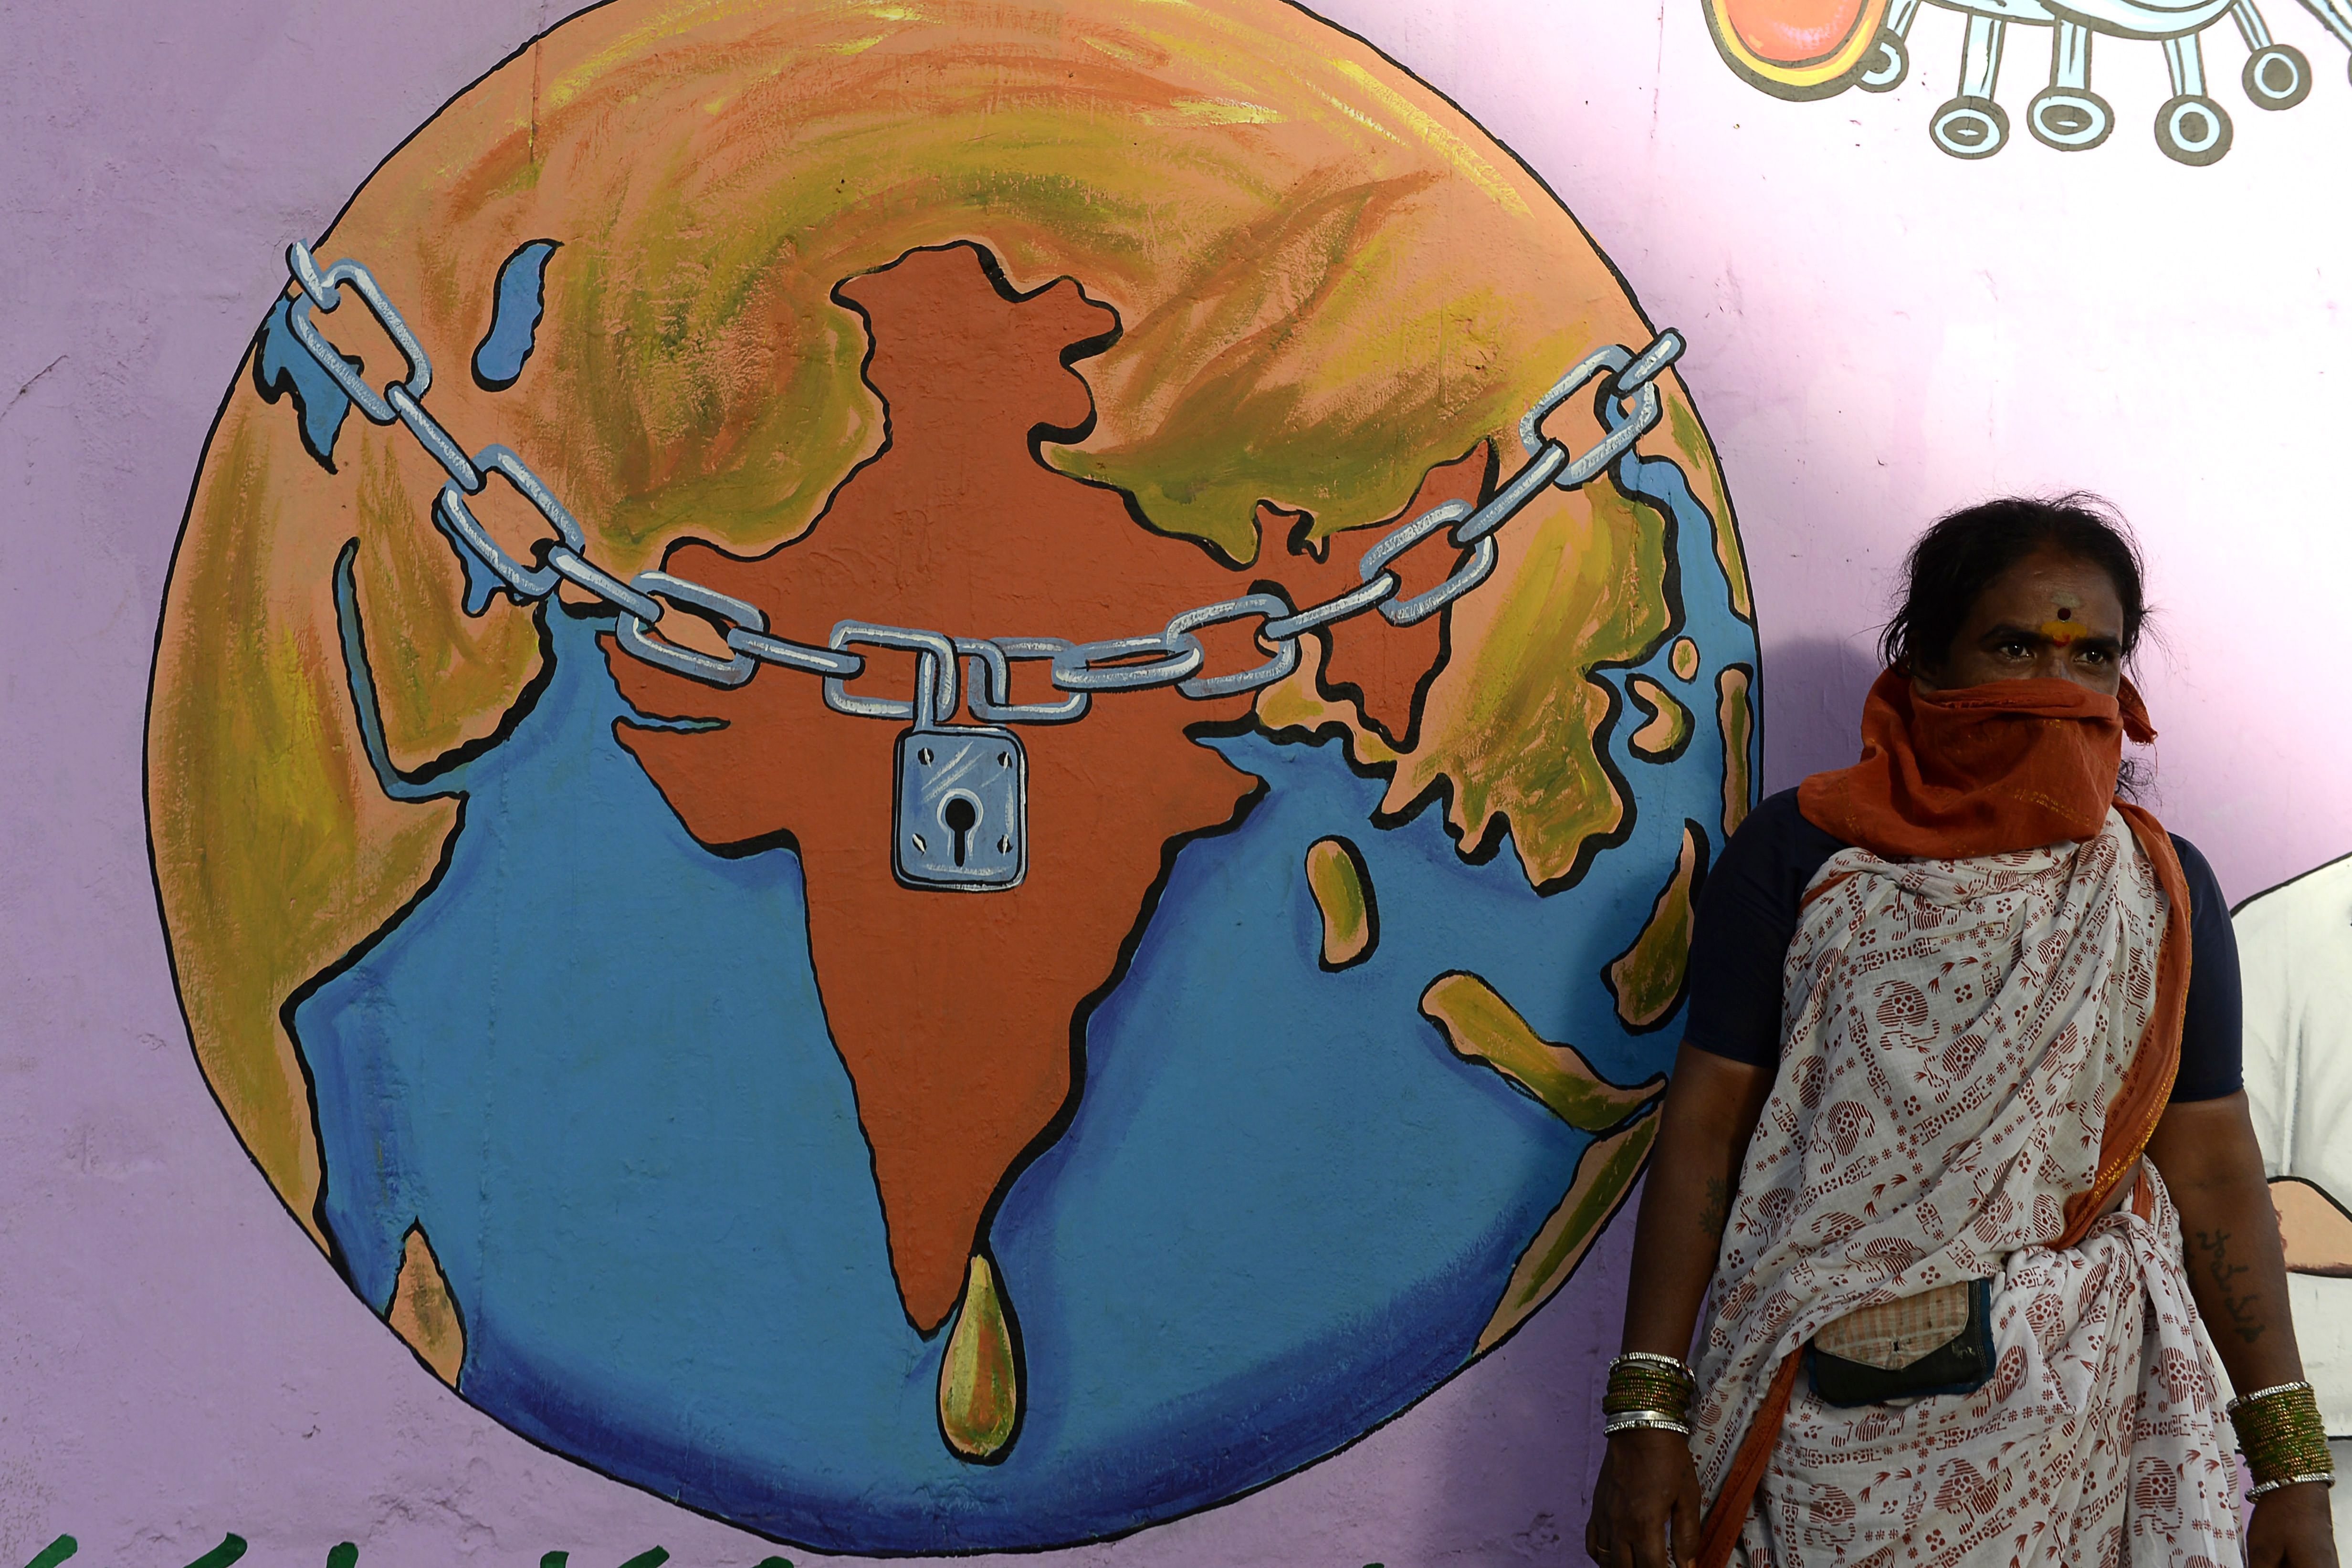 Graffiti depicting a world under lockdown, during an Indian lockdown against COVID-19, on the outskirts of Hyderabad on May 29